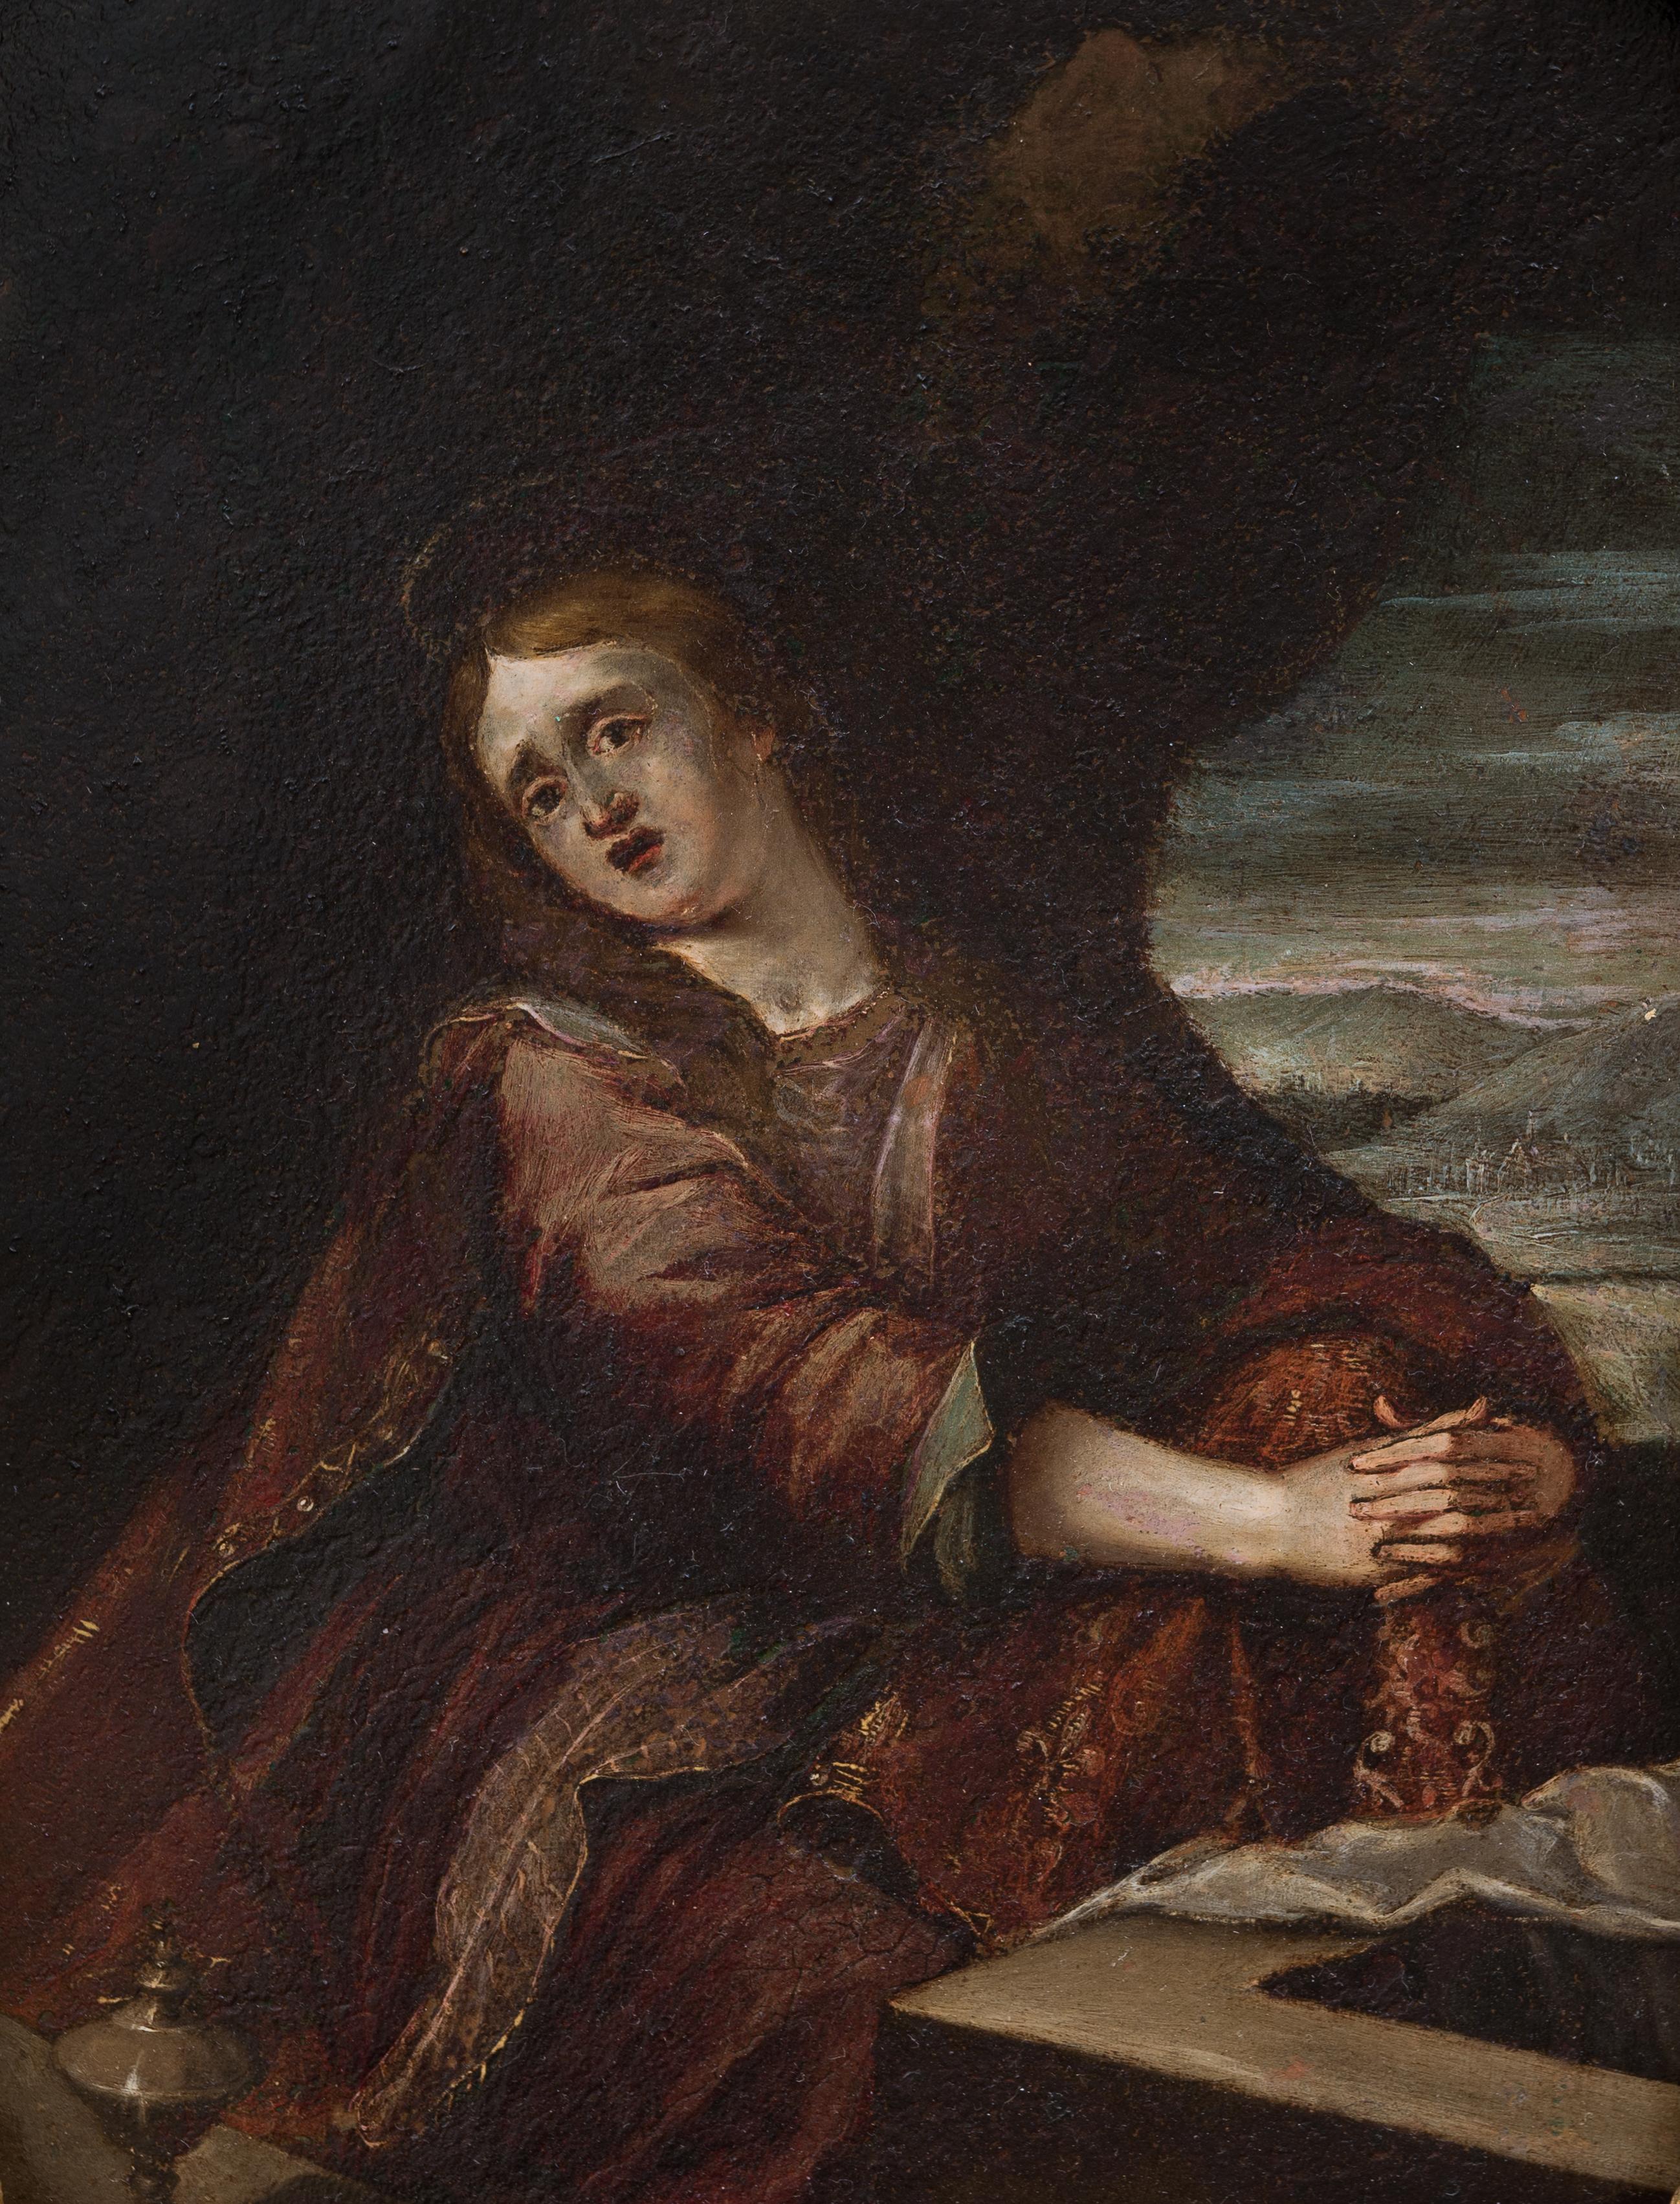 Flemish School, 17th Century, Mary Magdalene  - Painting by Unknown